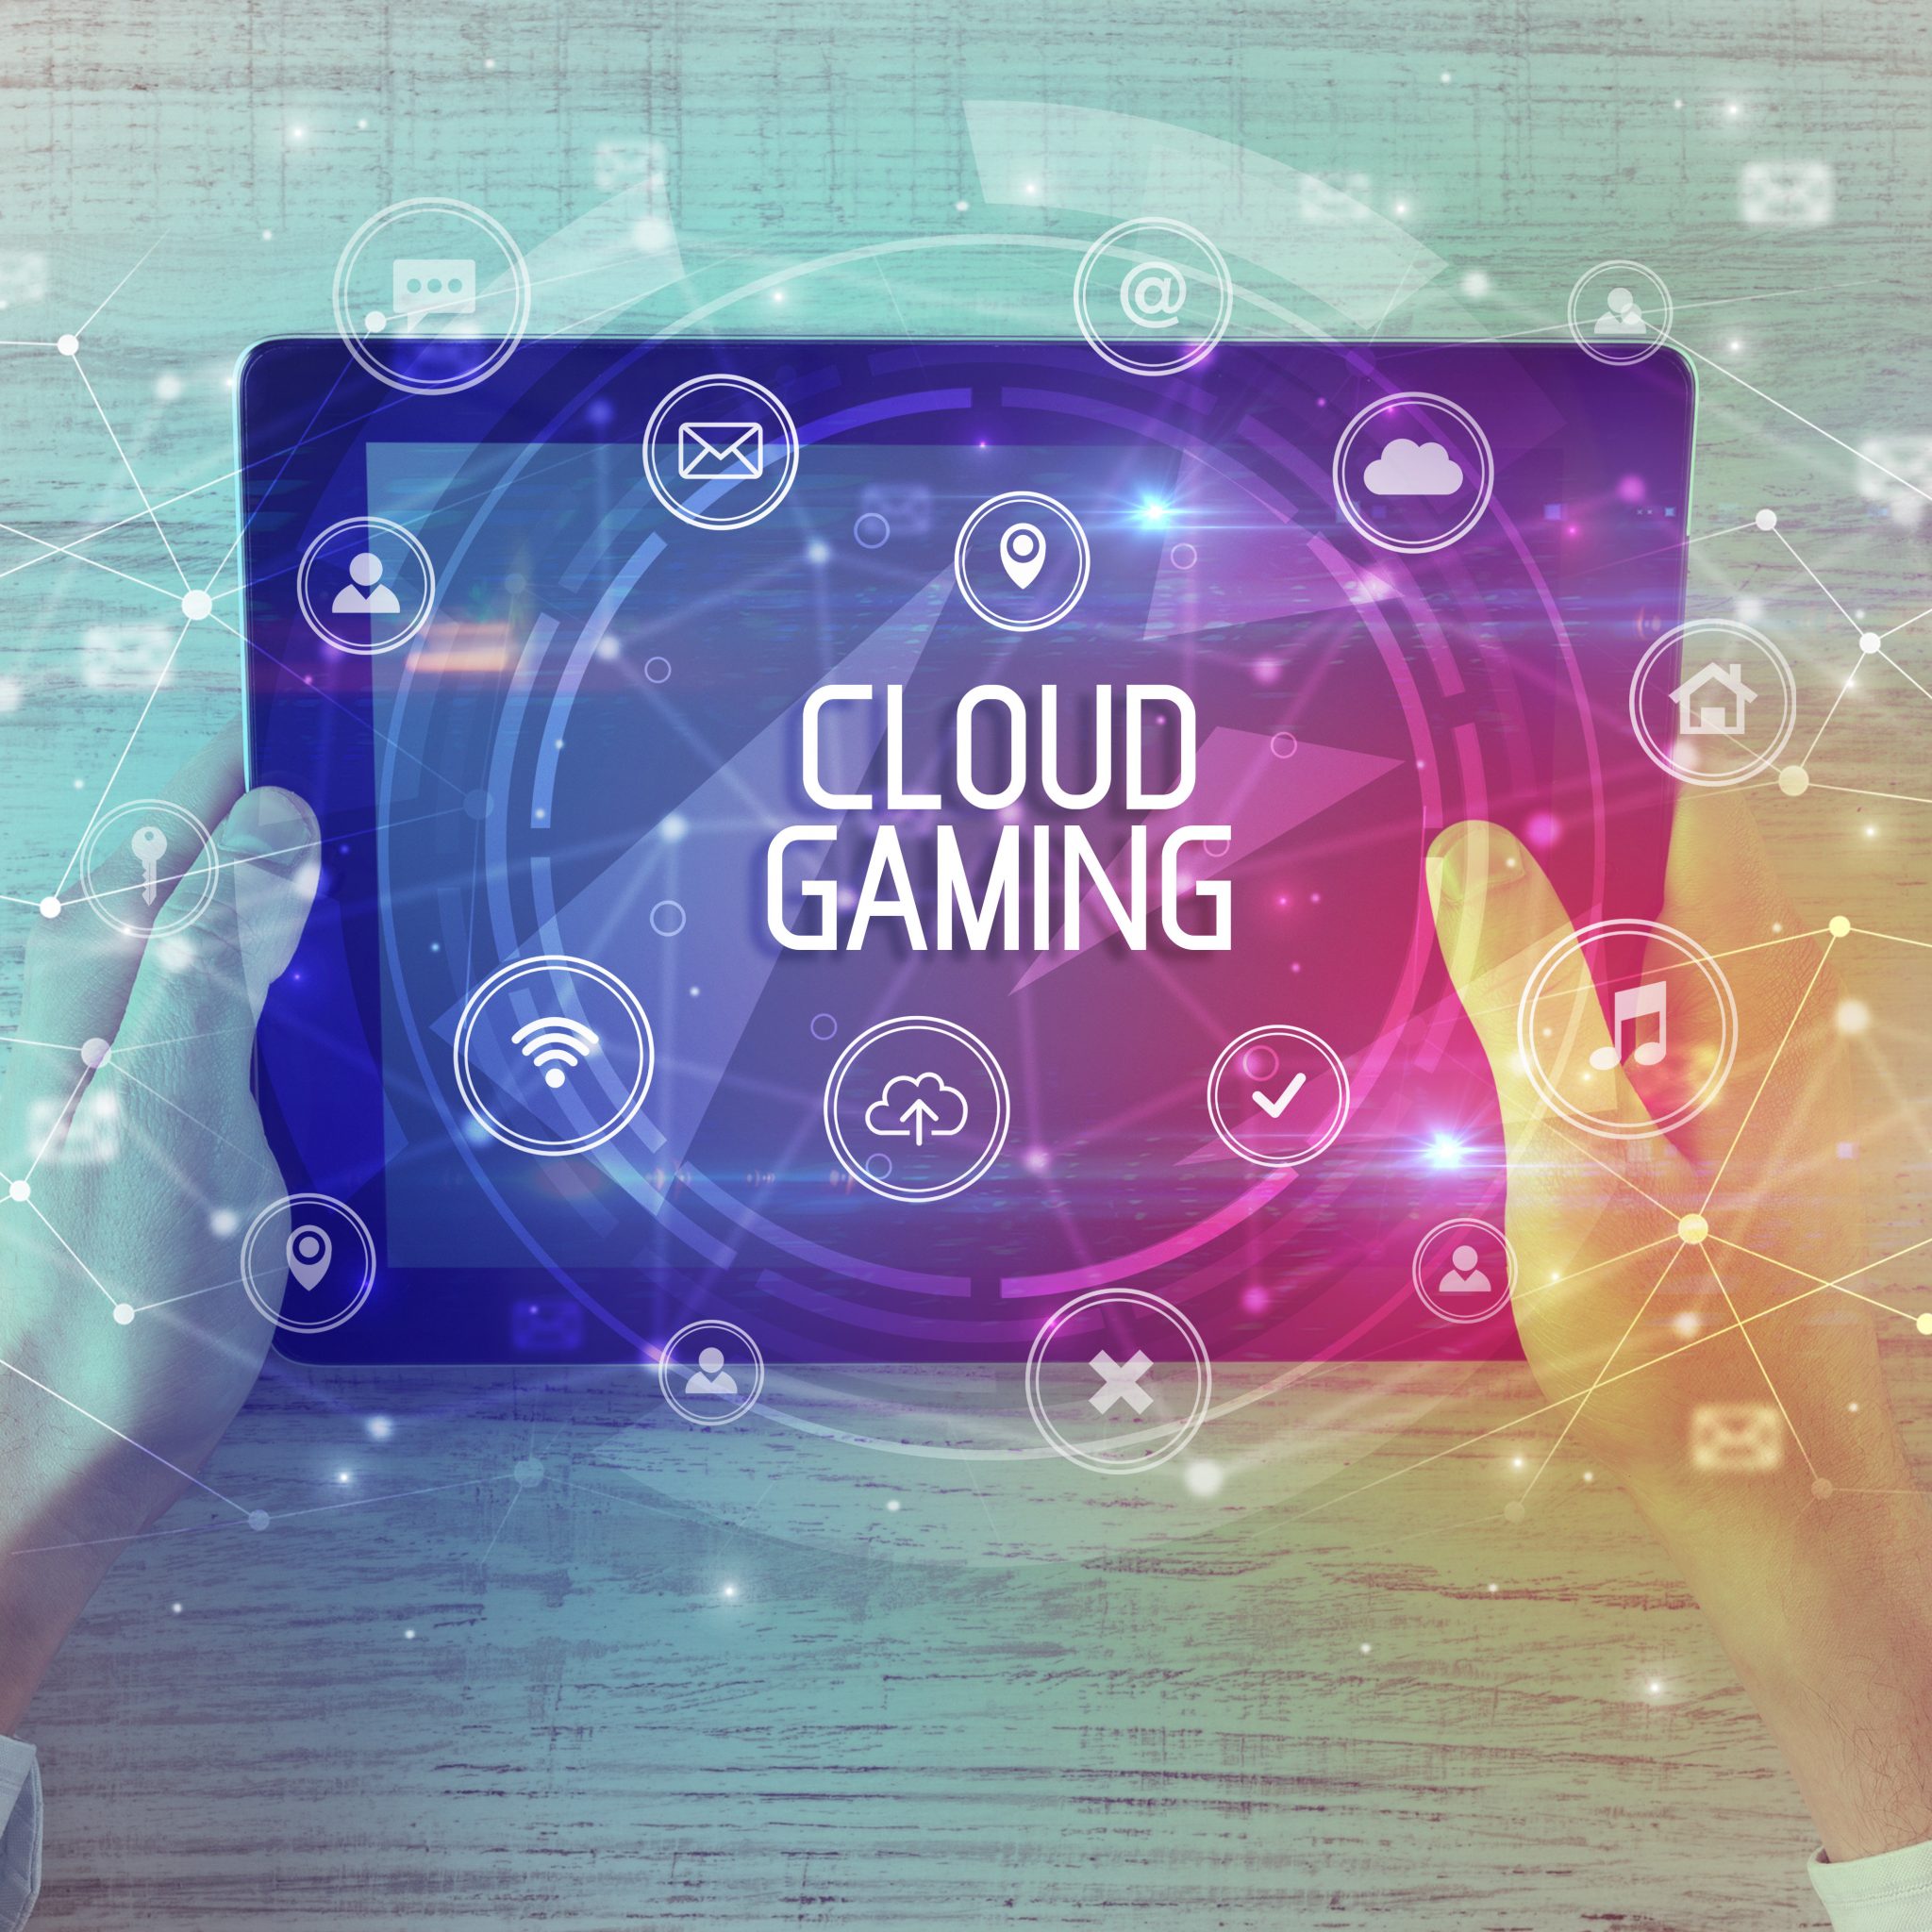 Cloud Gaming's 21.7 Million Paying Users Helped the Market